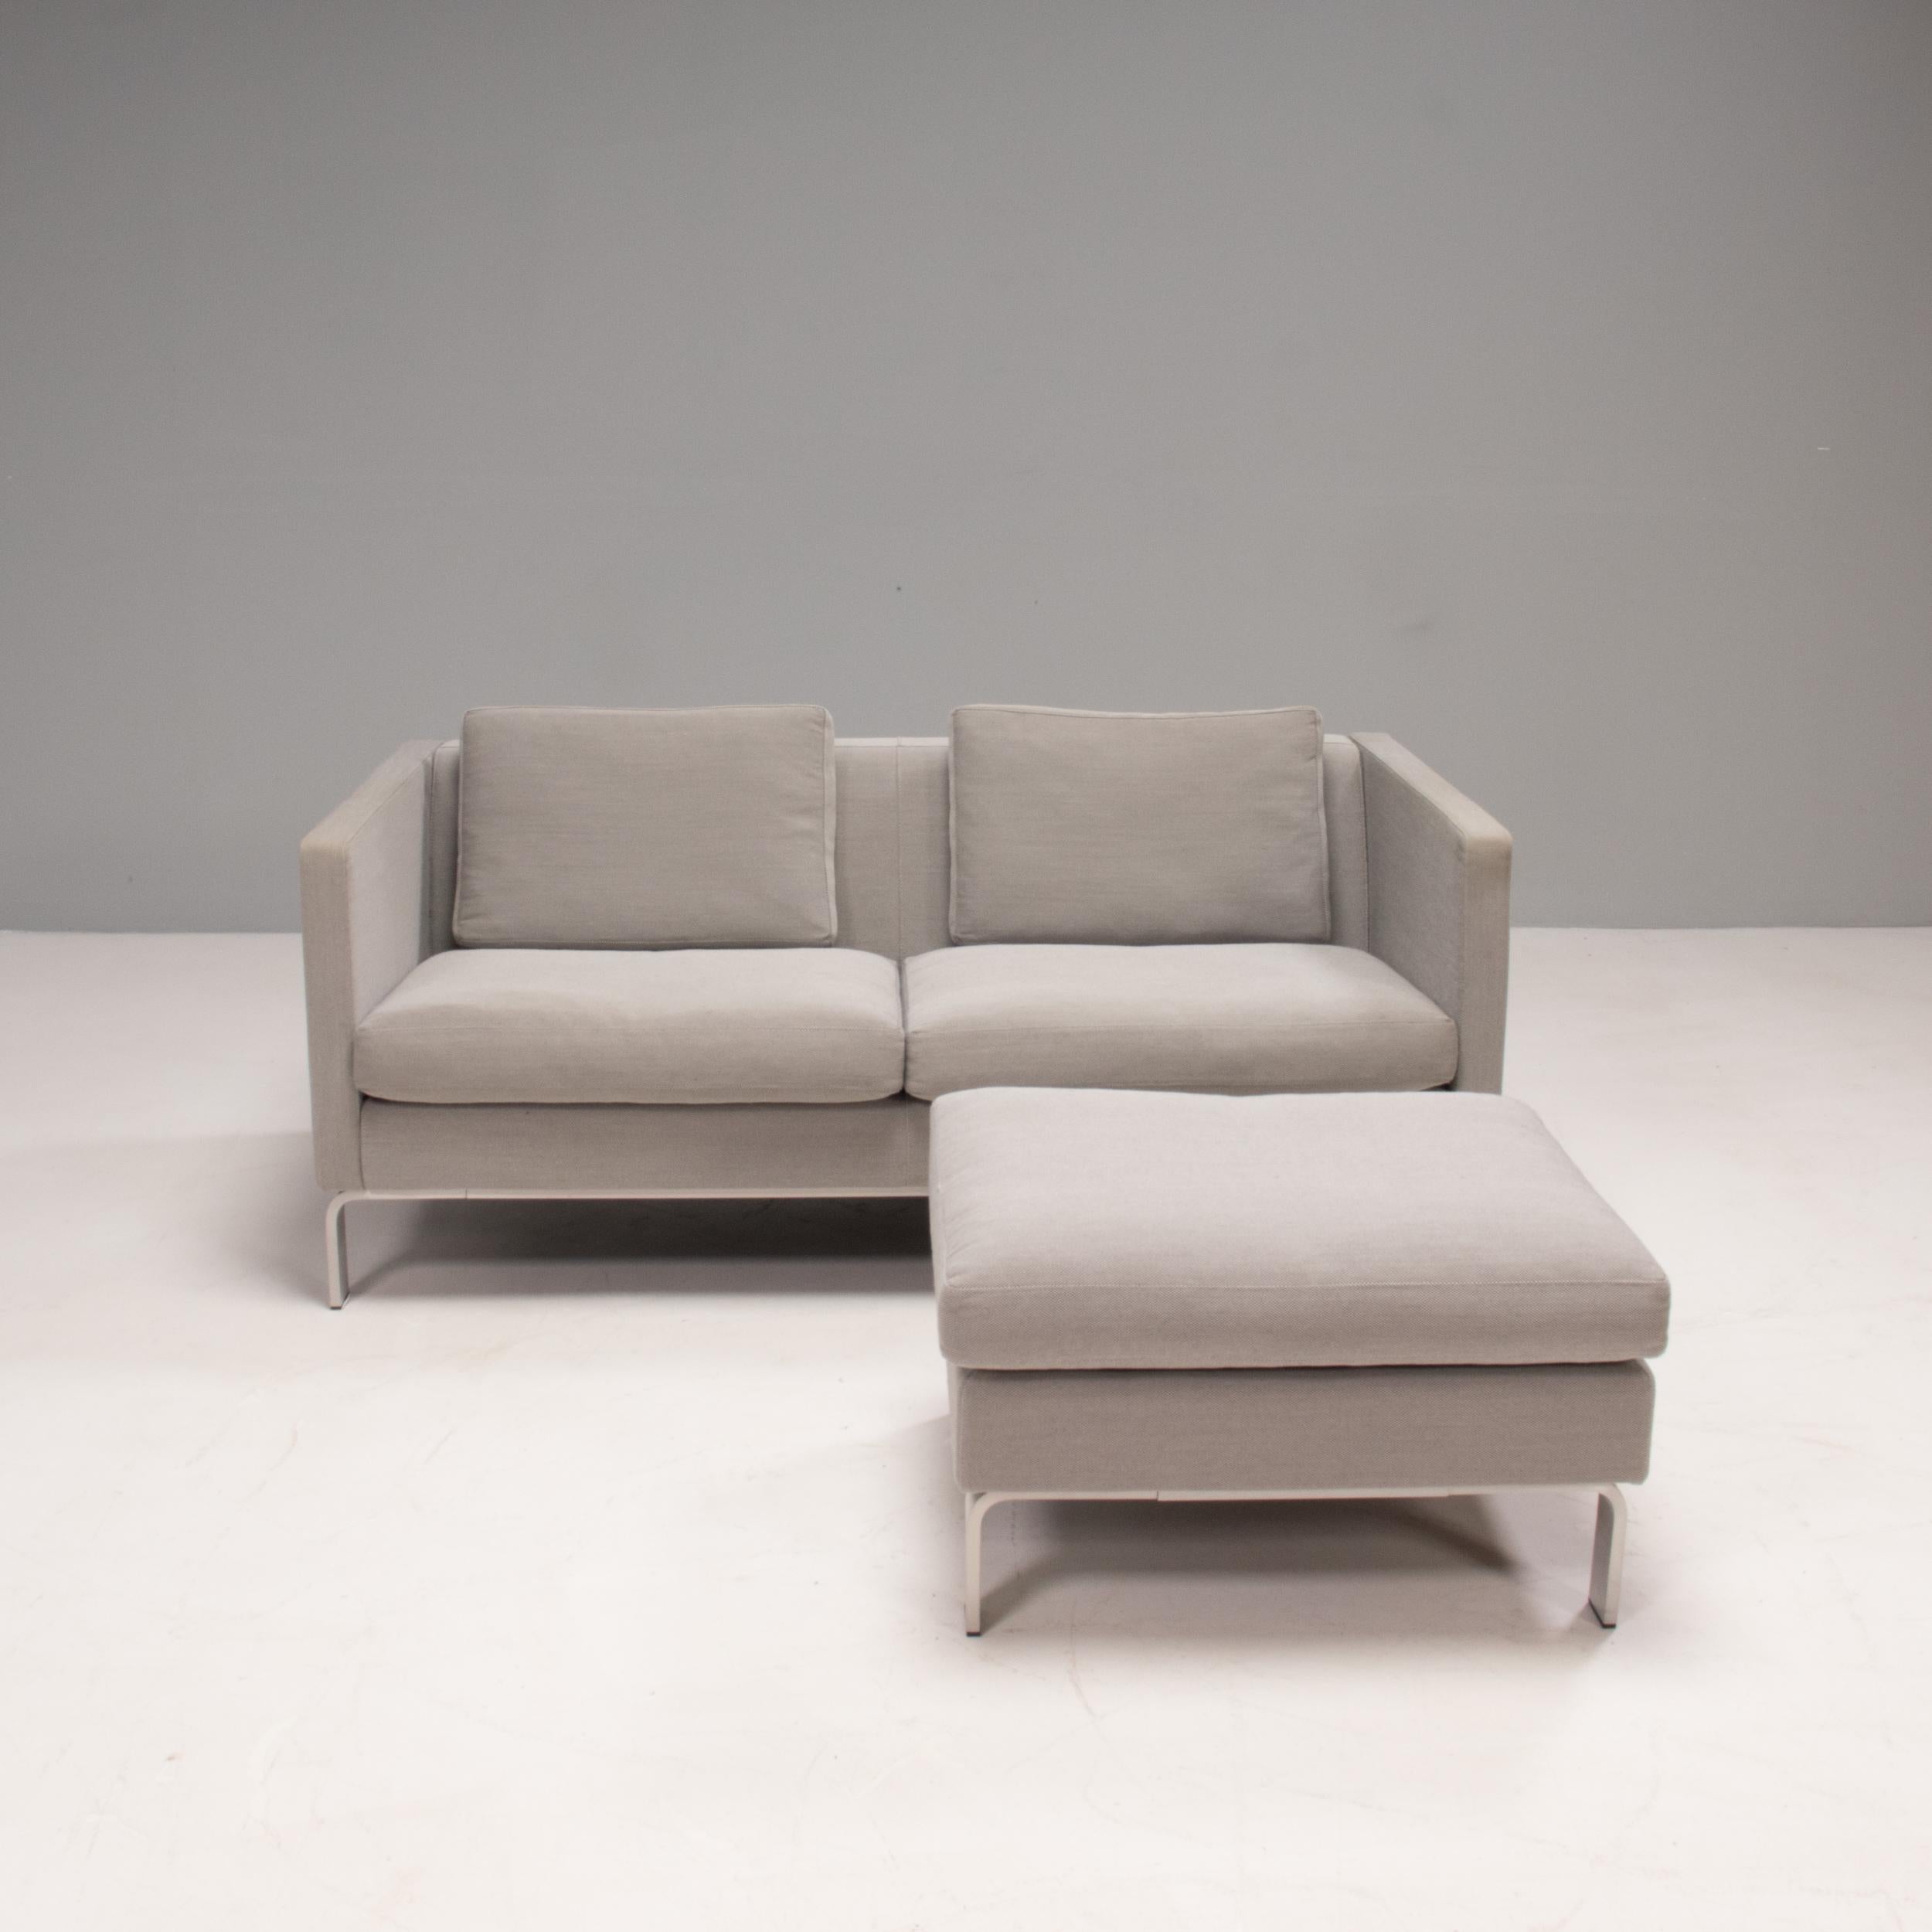 Designed and manufactured by Erik Jørgensen this sofa and footstool is a timeless example of high quality Danish design.

The slimline frame and sleek Silhouette is contrasted by the curved lines of the chrome feet.

Fully upholstered in grey